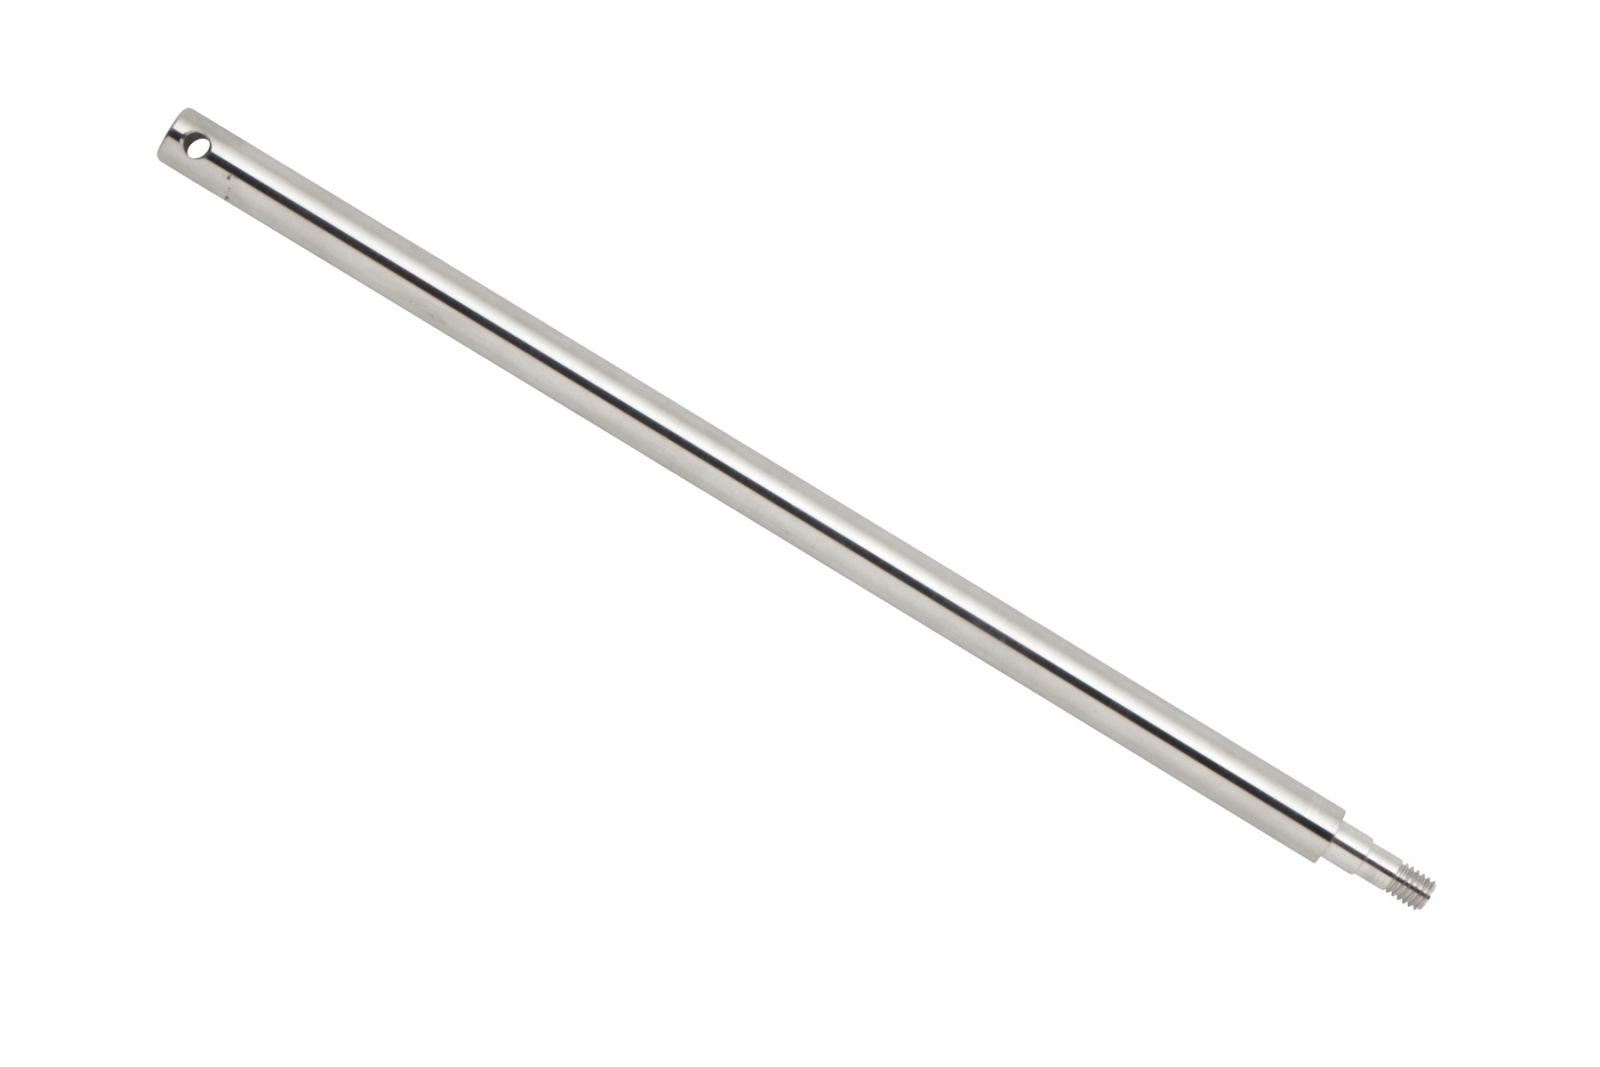 TapeTech® Piston Shaft. Part number 700002F